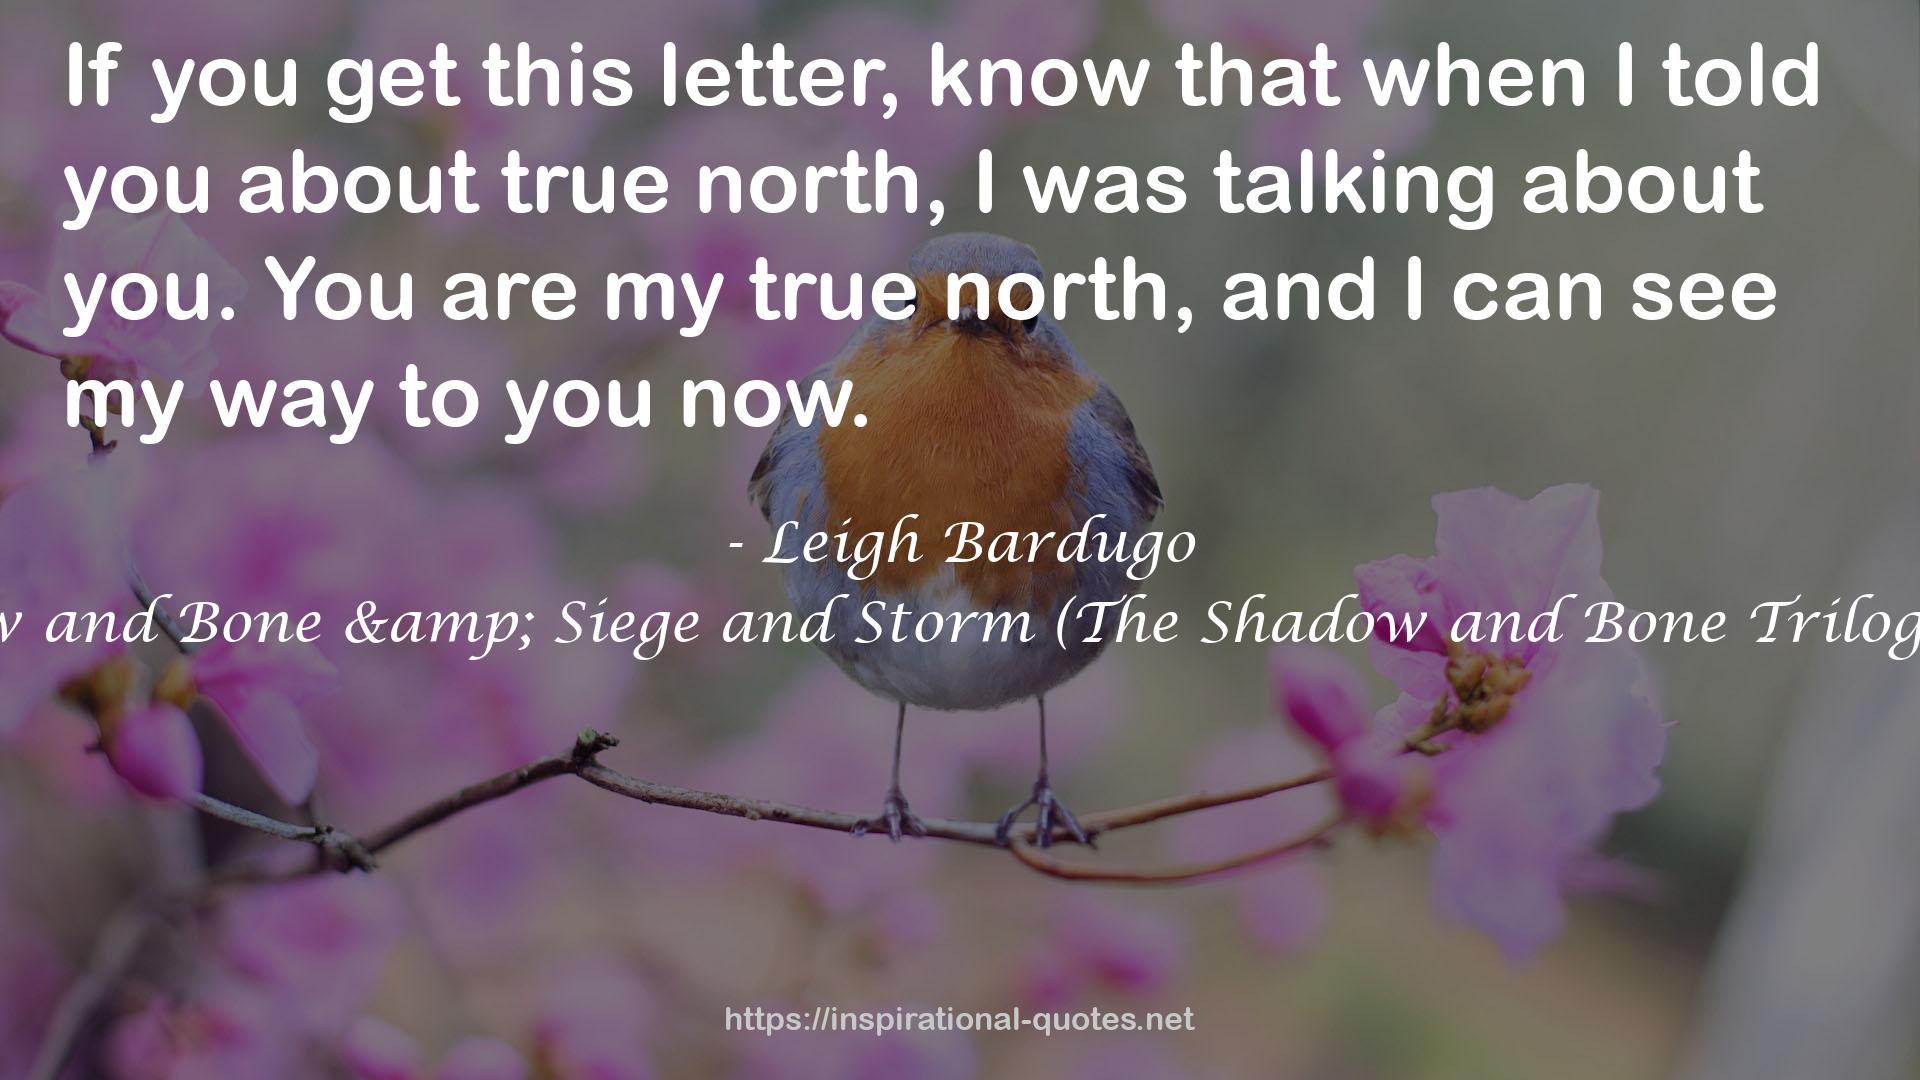 Shadow and Bone & Siege and Storm (The Shadow and Bone Trilogy, #1-2) QUOTES